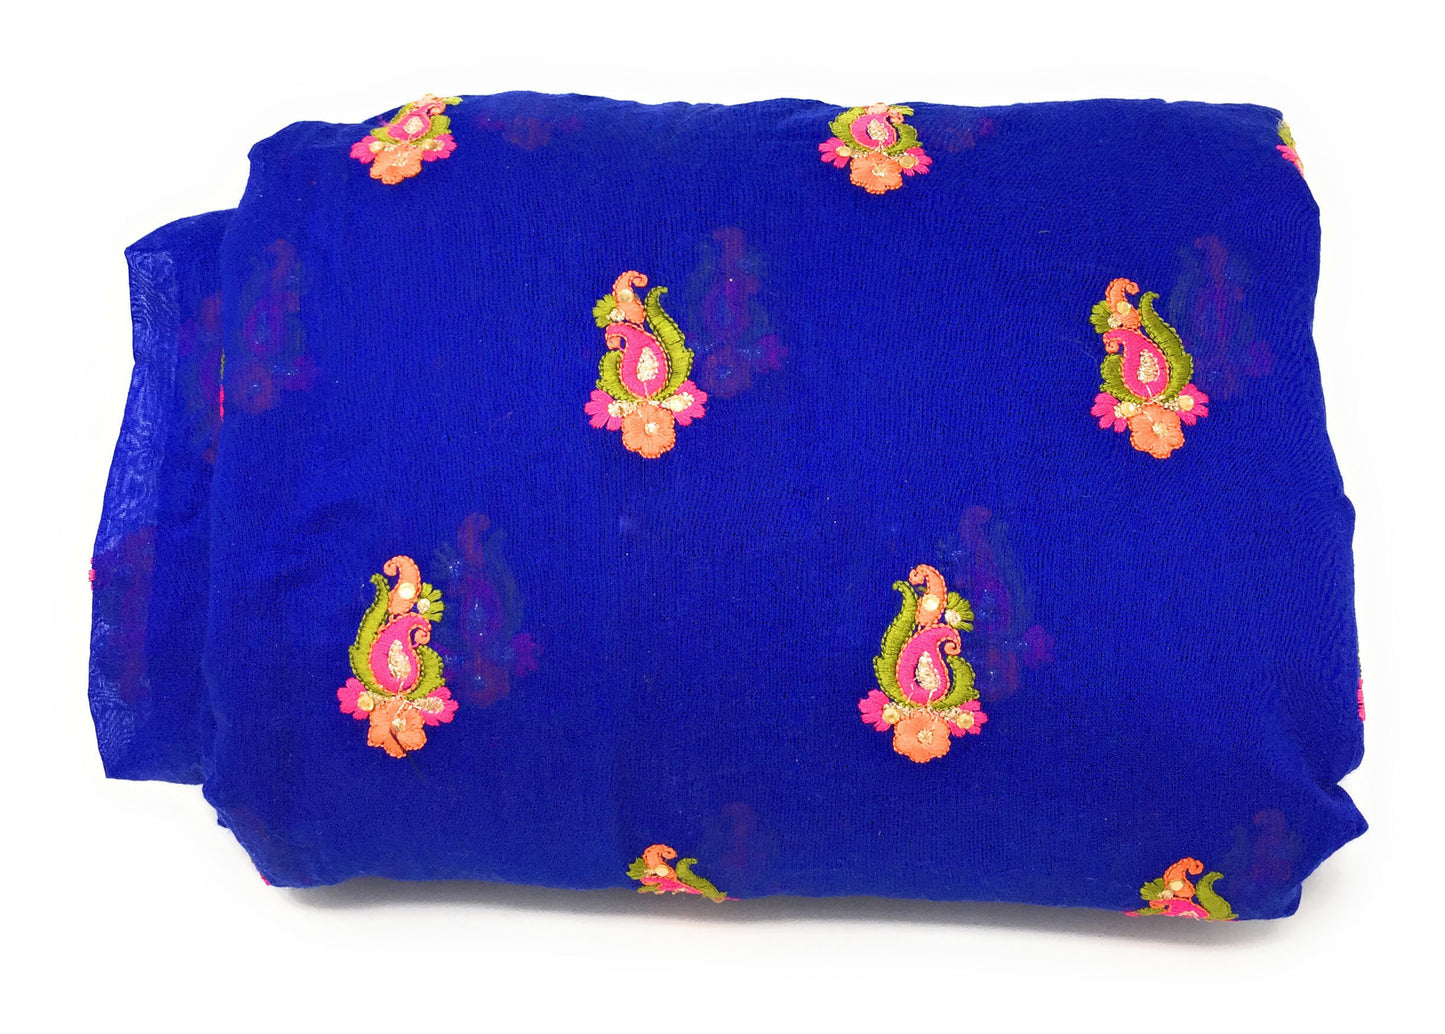 Wholesale Blue Chanderi Cotton Fabric Embroidered Dress Material, Min Order 50 mtr, Price per mtr, Bulk Order only